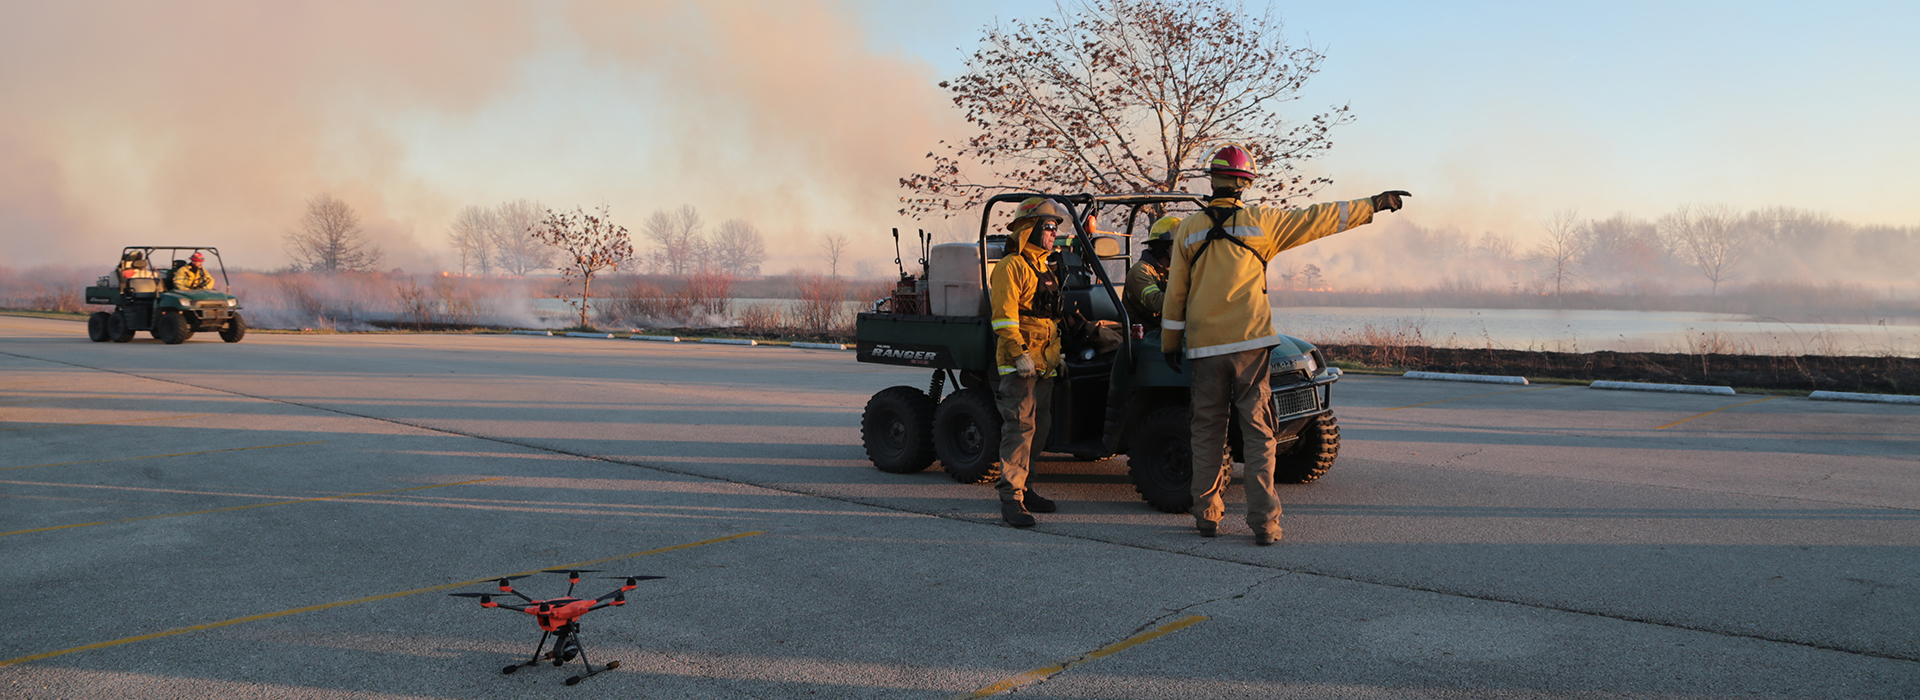 Yuneec H520 drone capturing prescribed fire at Illinois state park